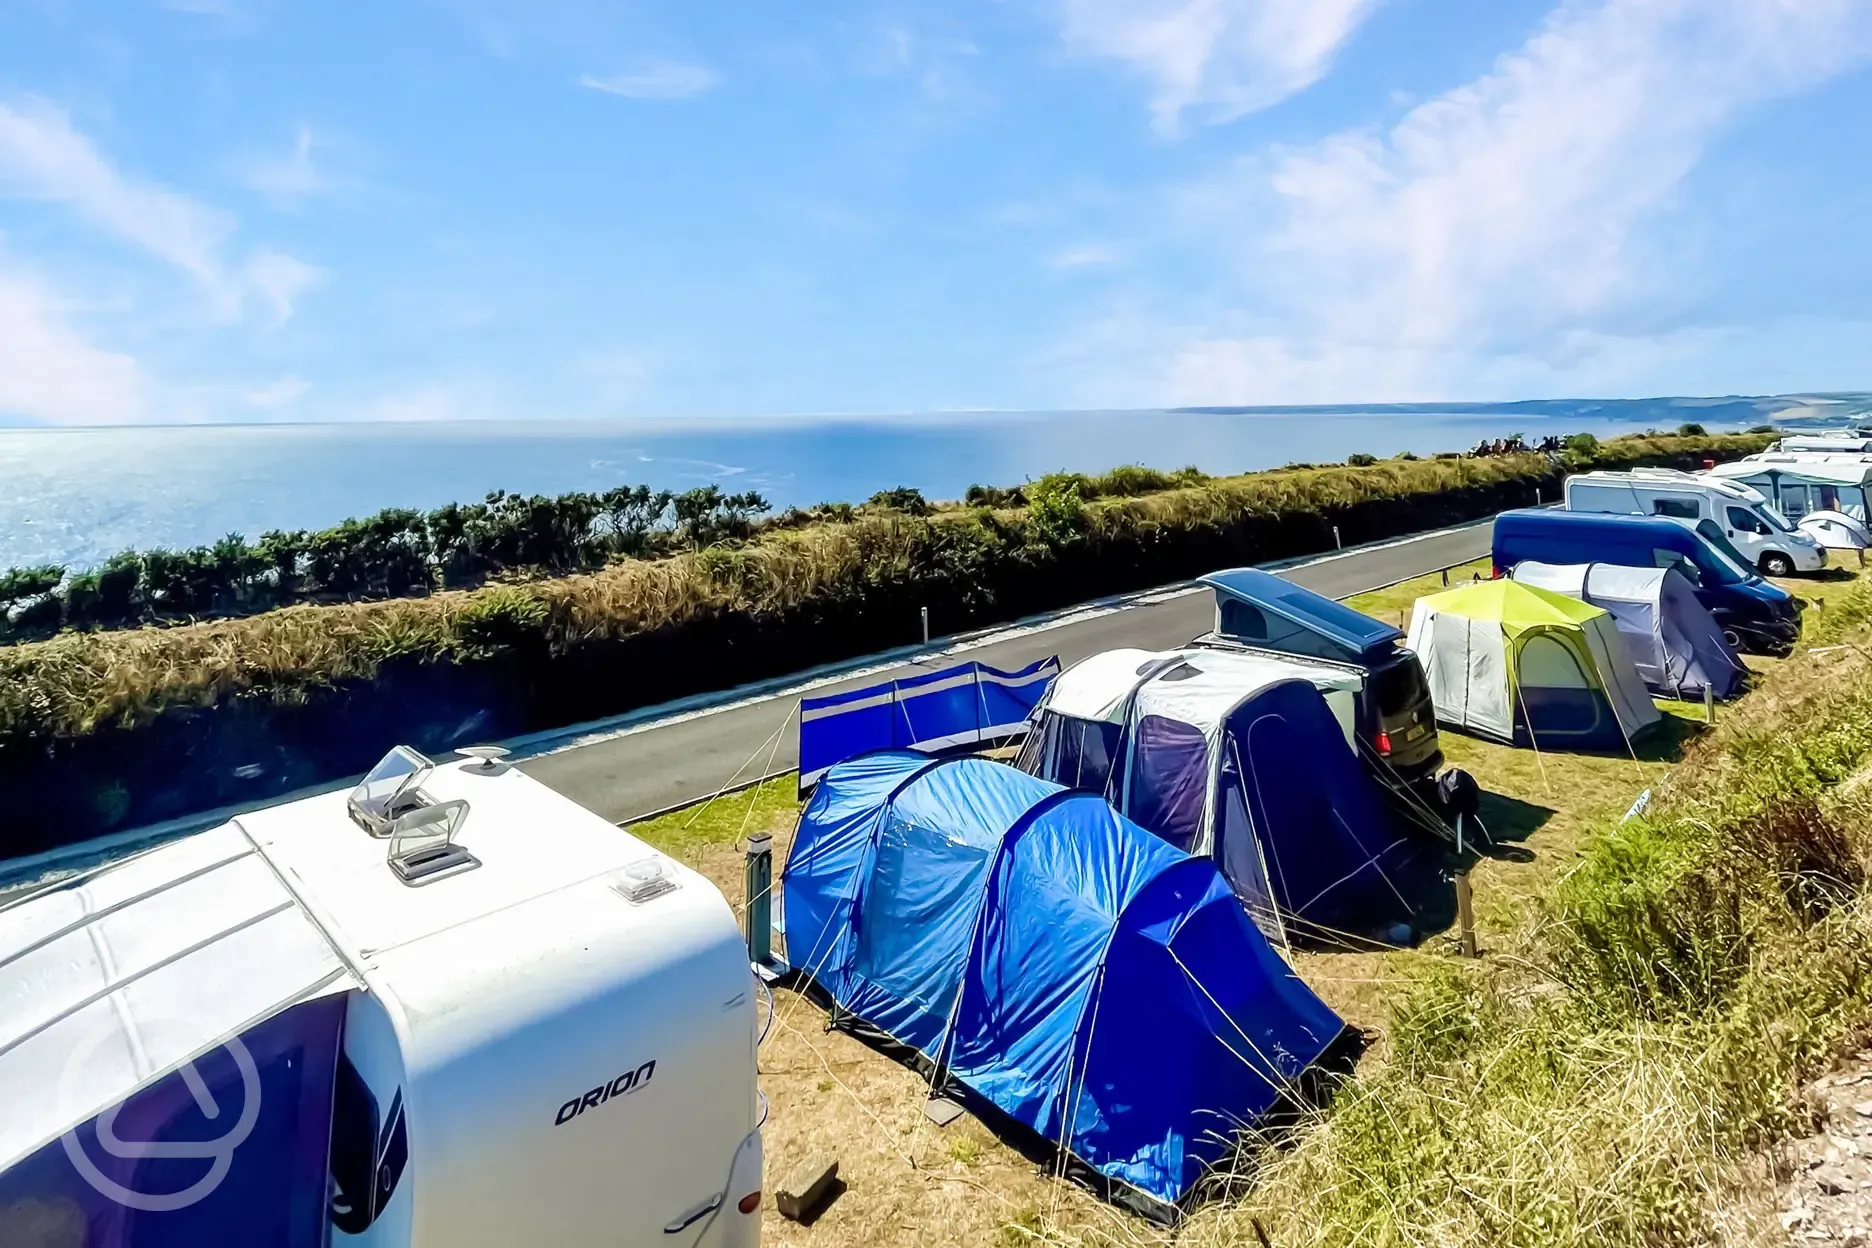 Electric grass pitches with sea views